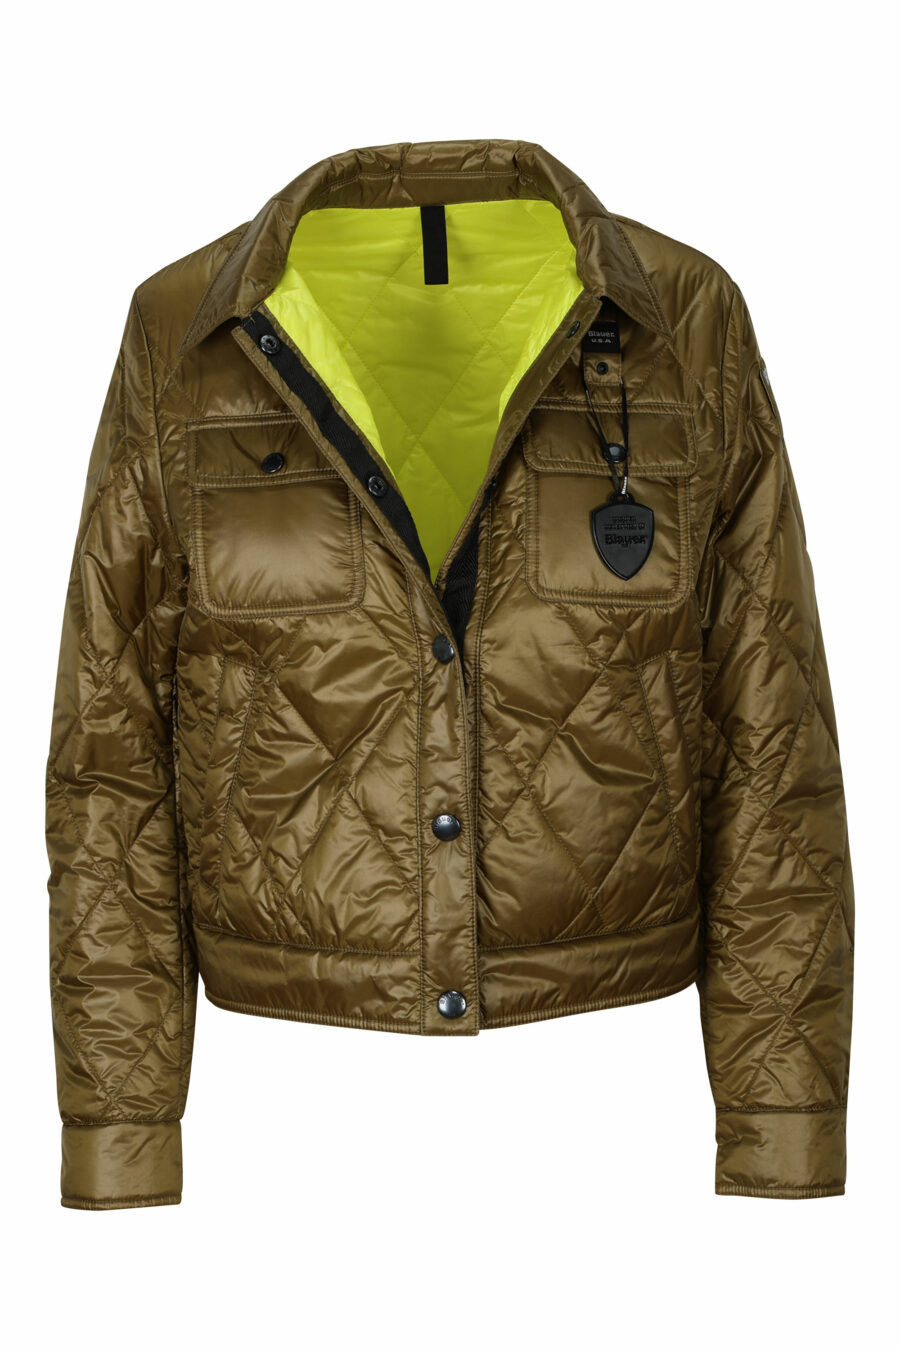 Green jacket with wavy lines and logo side patch - 8058610709860 1